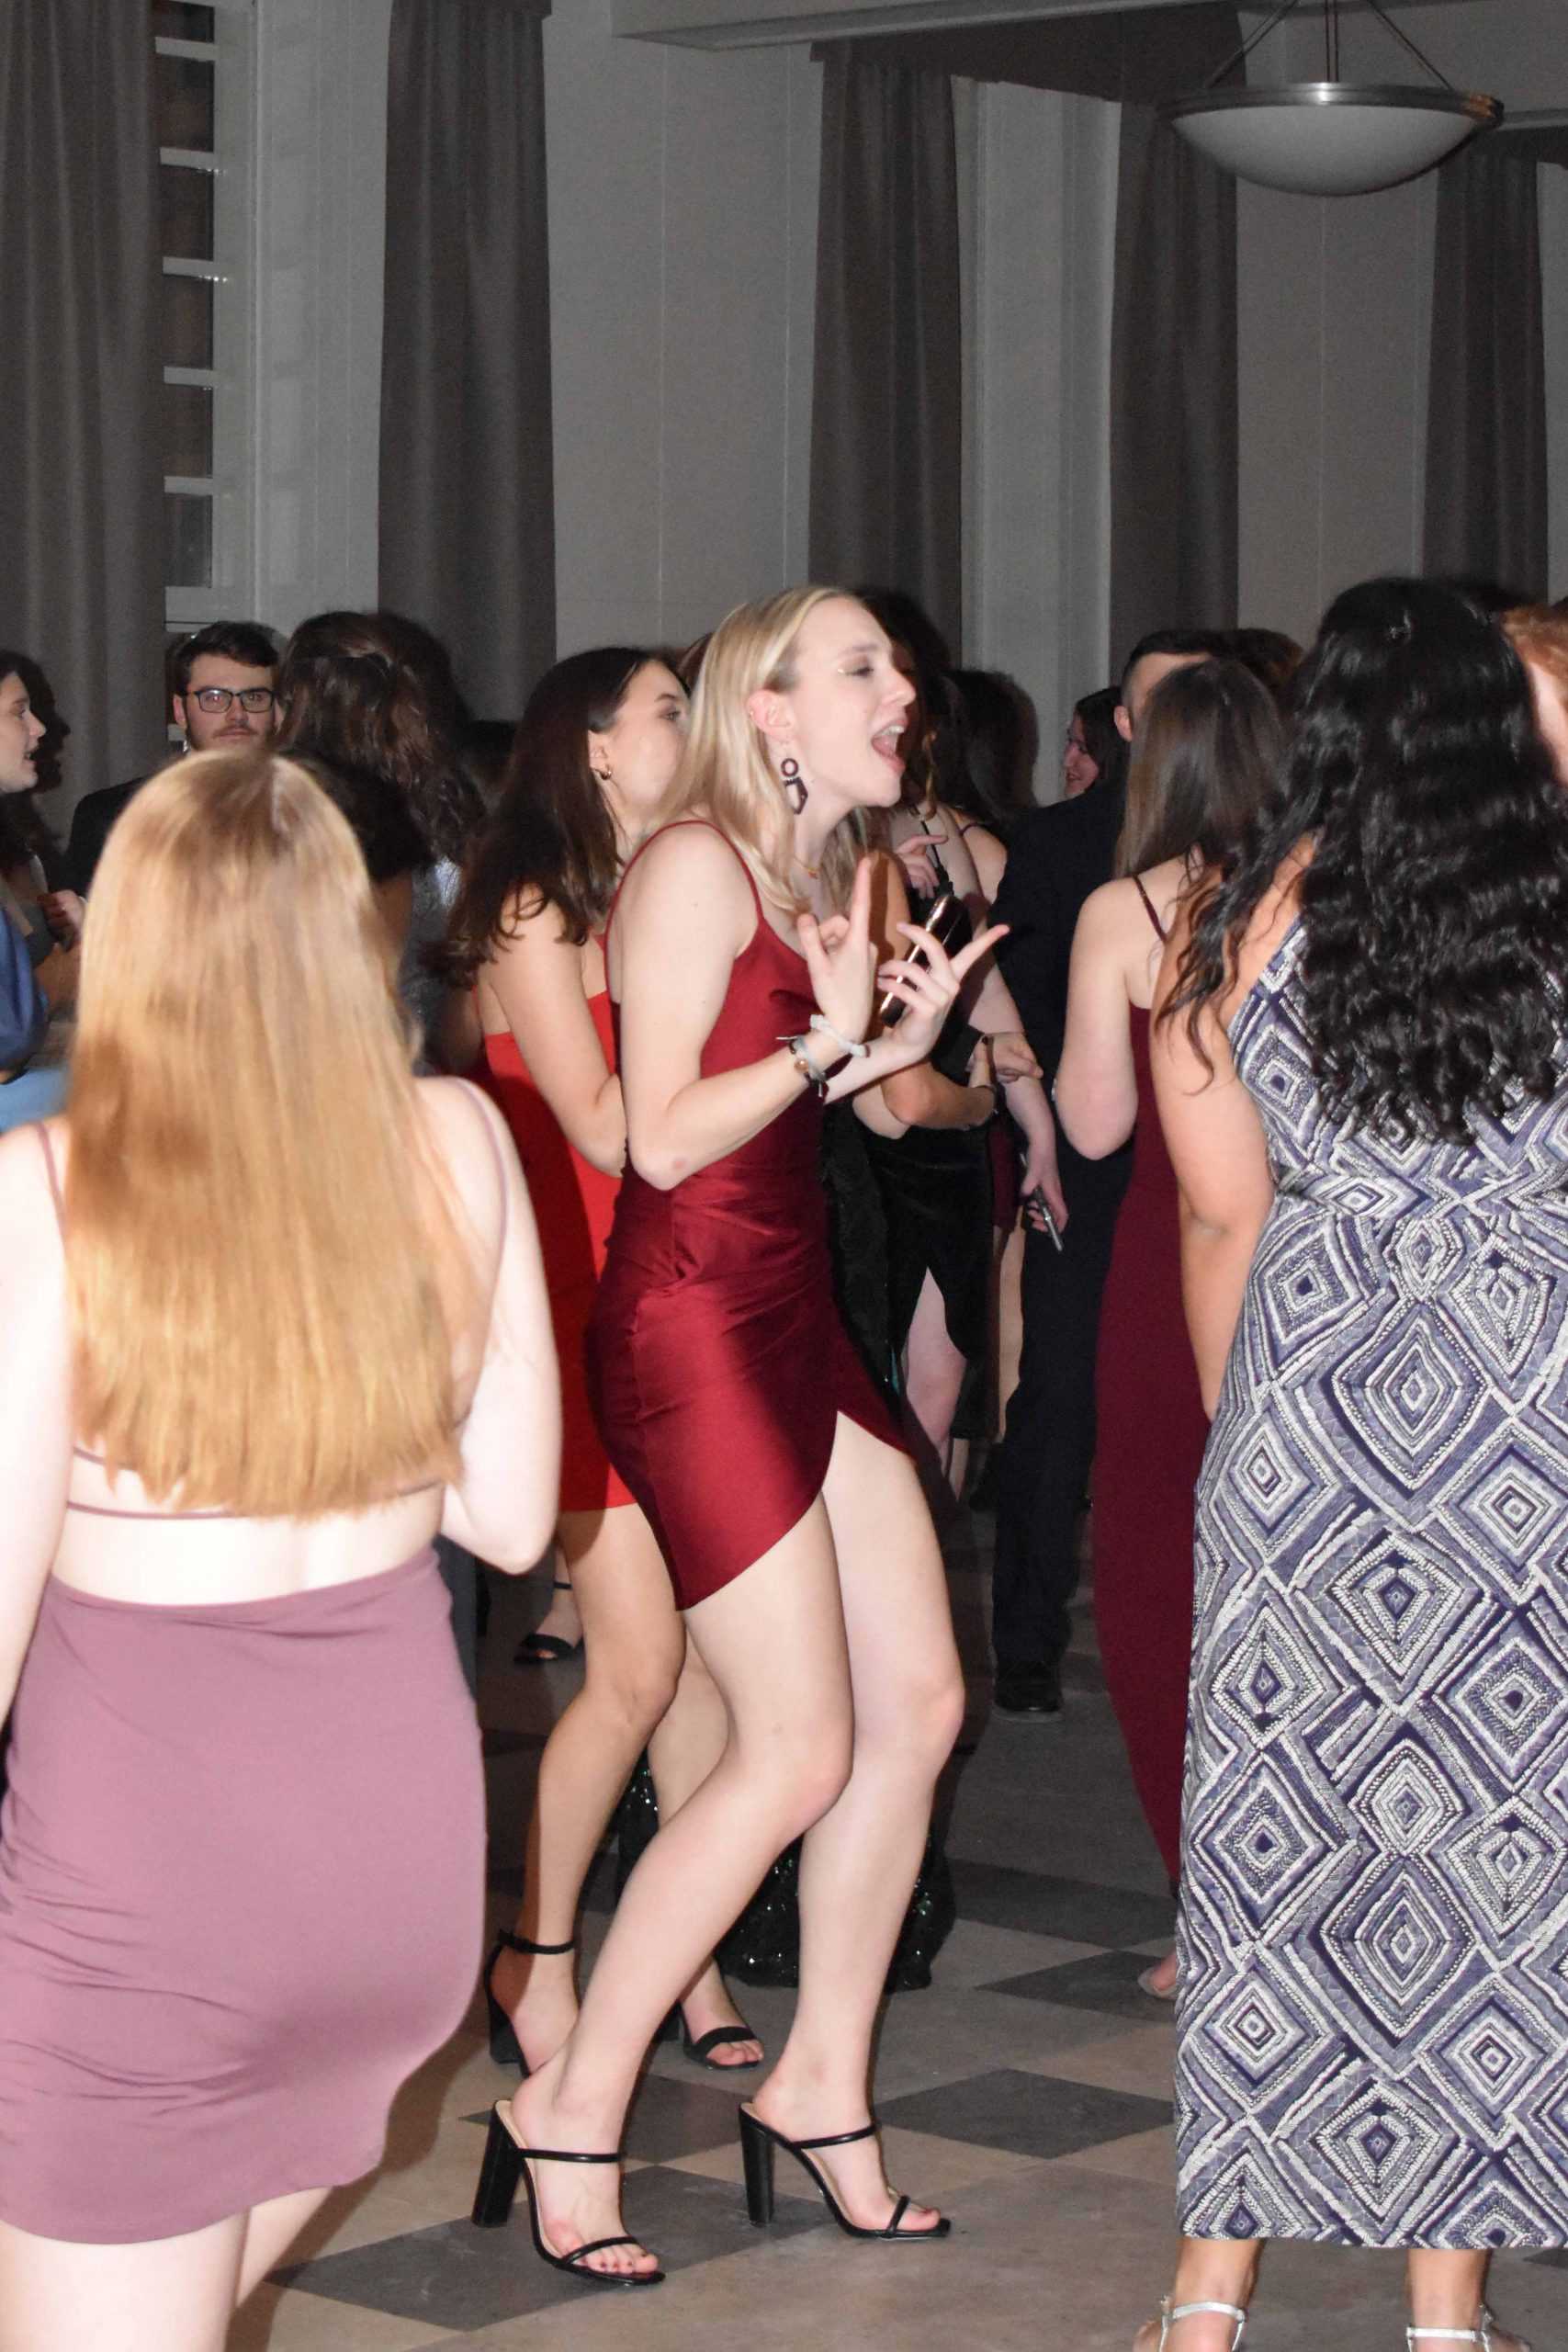 A+Night+at+The+Gala%3A+Campus+Ministry+Raises+Funds+for+Upcoming+Service+Trip